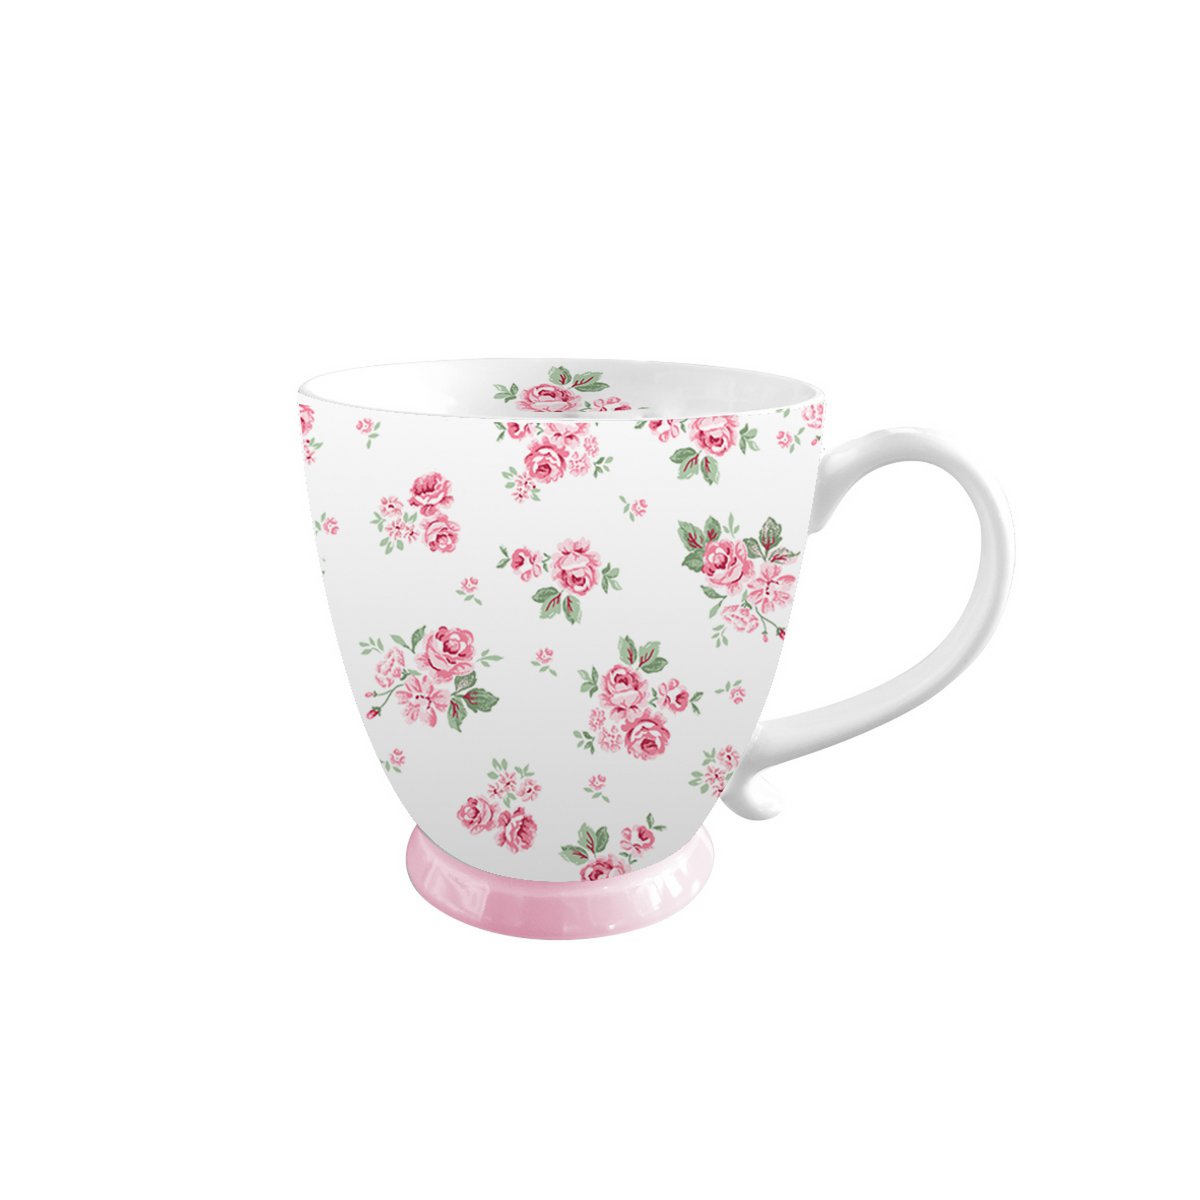 TAZZA IN PORCELLANA LUCY 430ML ISABELLE ROSE